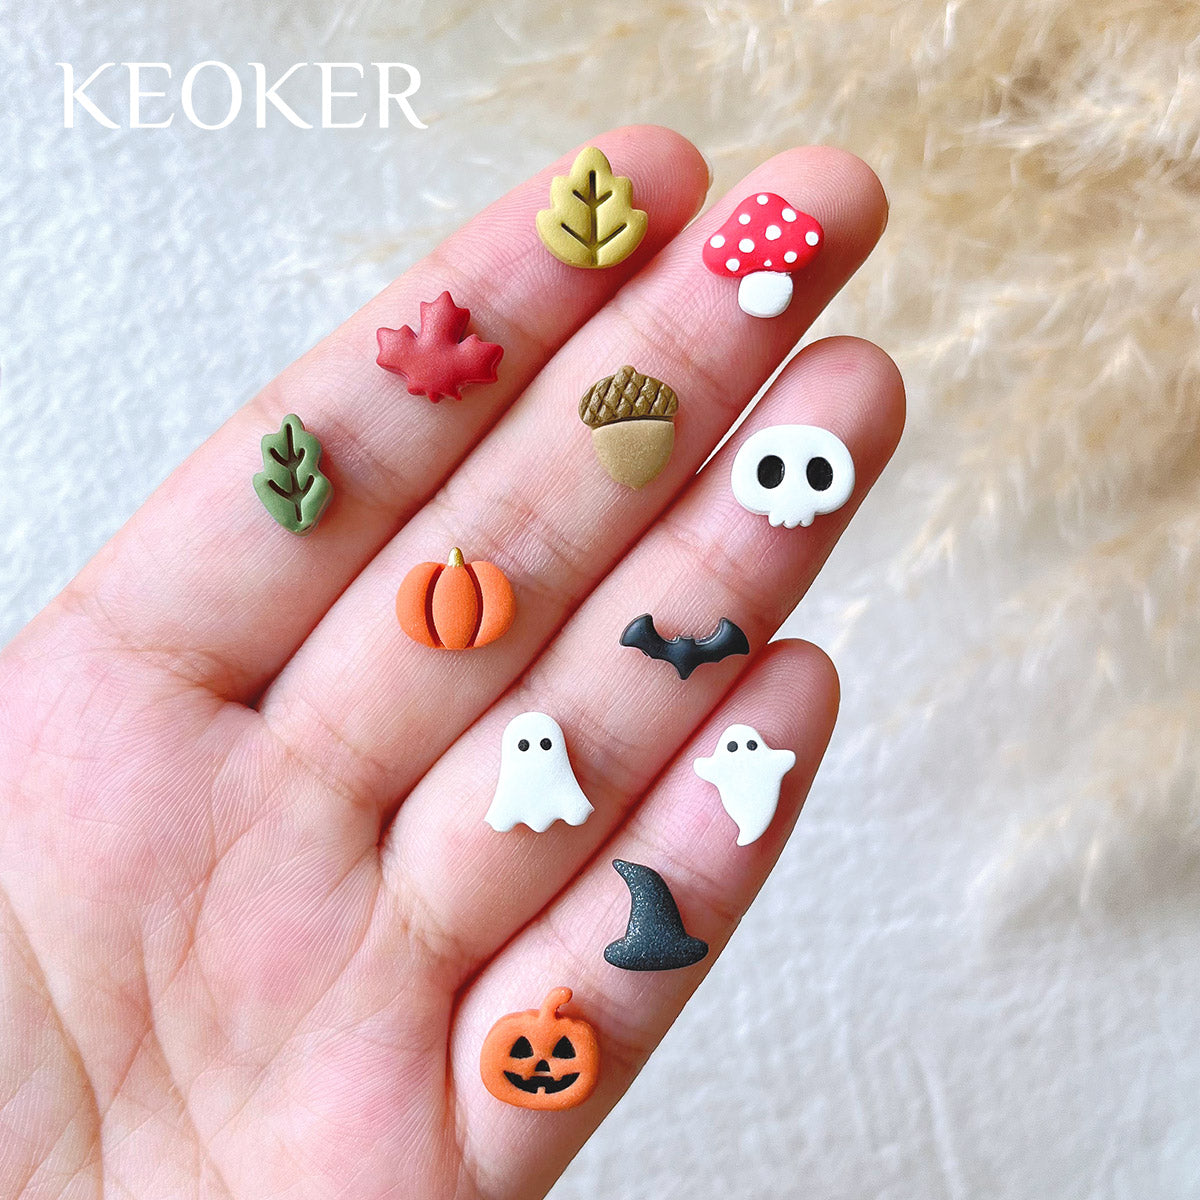 Keoker 24 Mini Clay Cutters with Screw Handle, Polymer for Earrings, Small  Tools for Clay Jewelry for Halloween Christmas Design